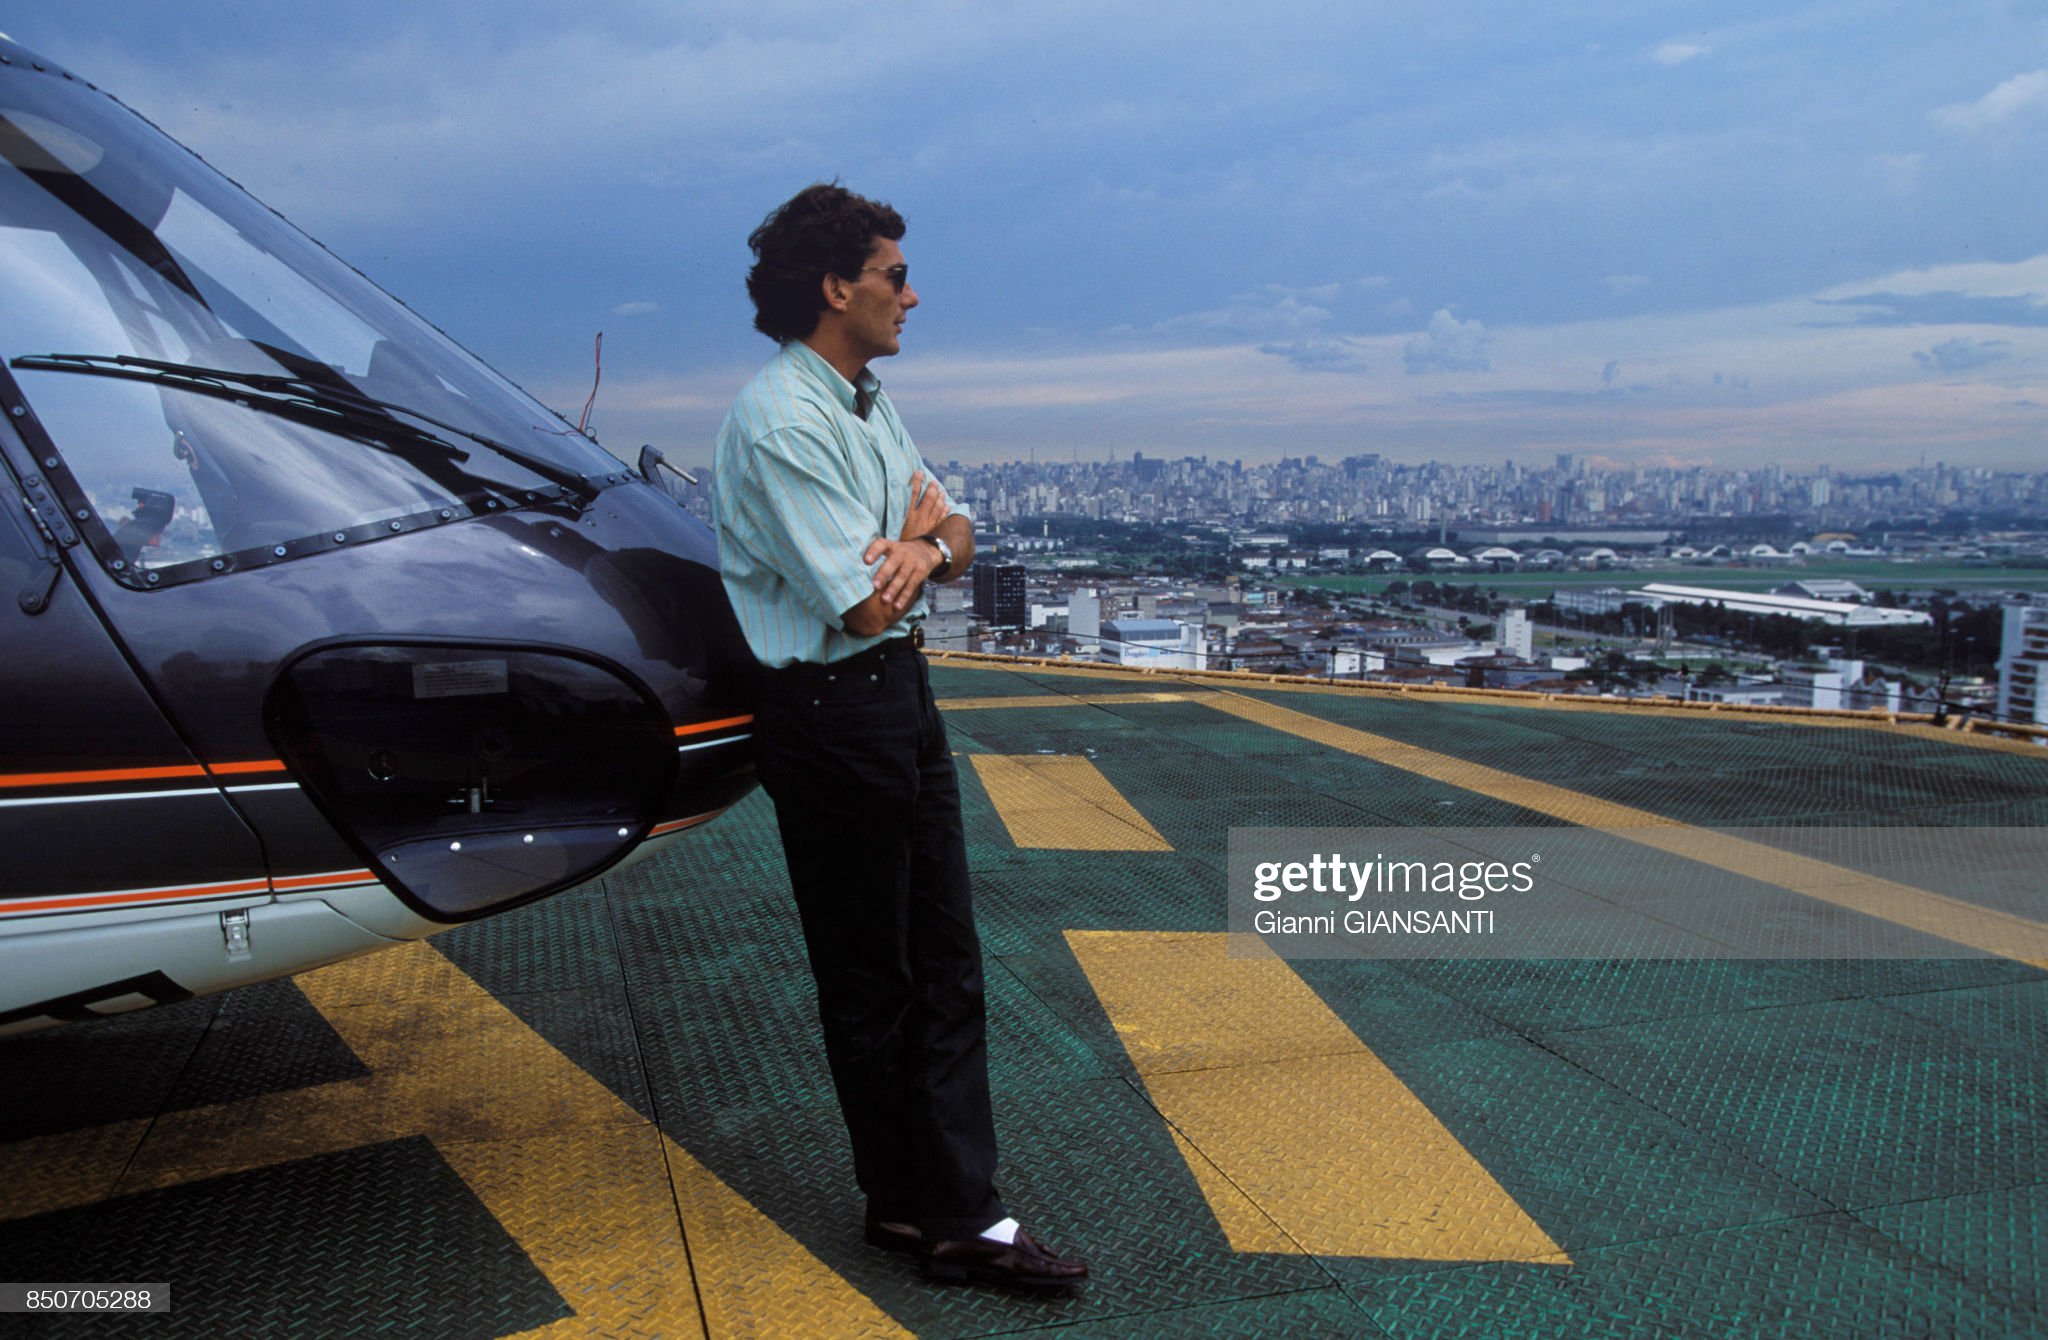 Ayrton Senna and his helicopter in Sao Paolo, Brazil, on February 15, 1994.